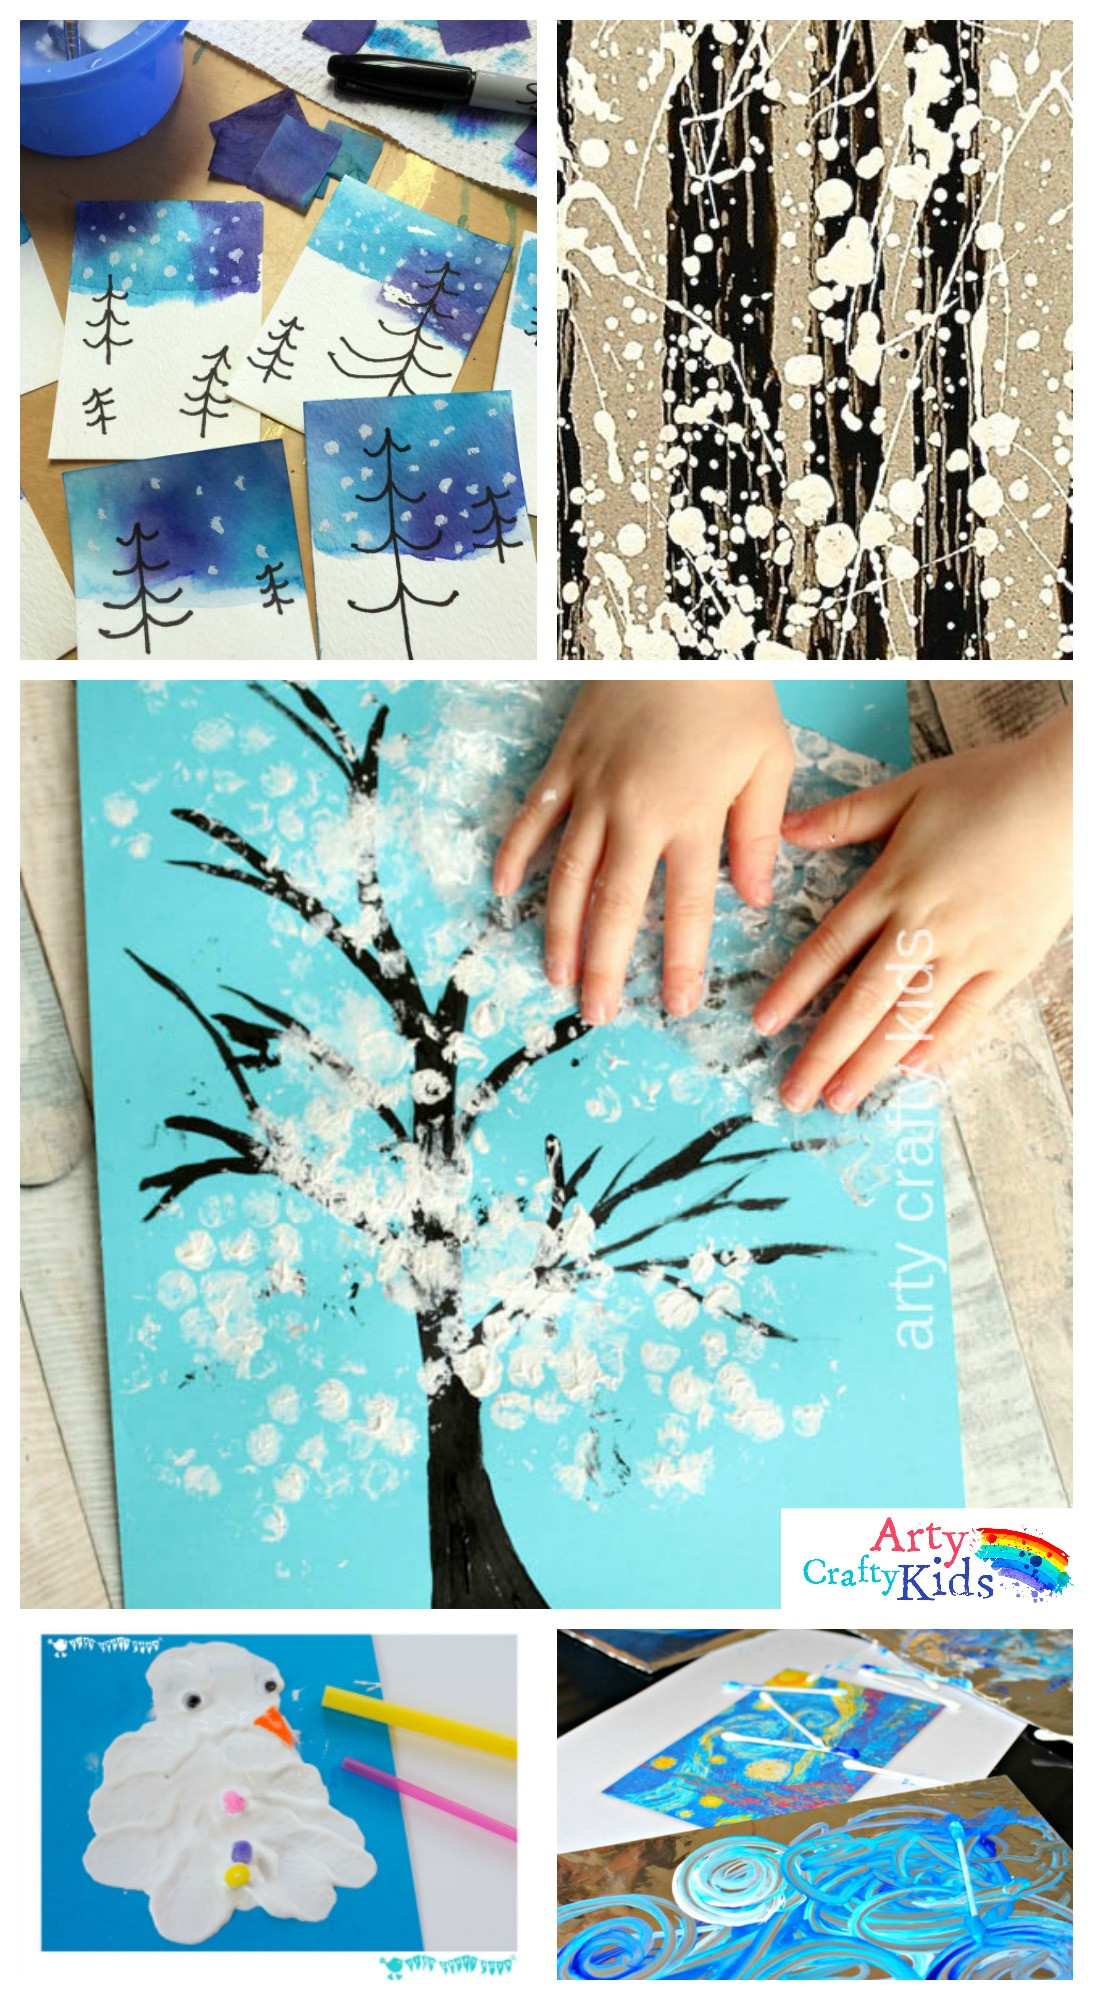 Toddler Winter Crafts
 14 Wonderful Winter Art Projects for Kids Arty Crafty Kids